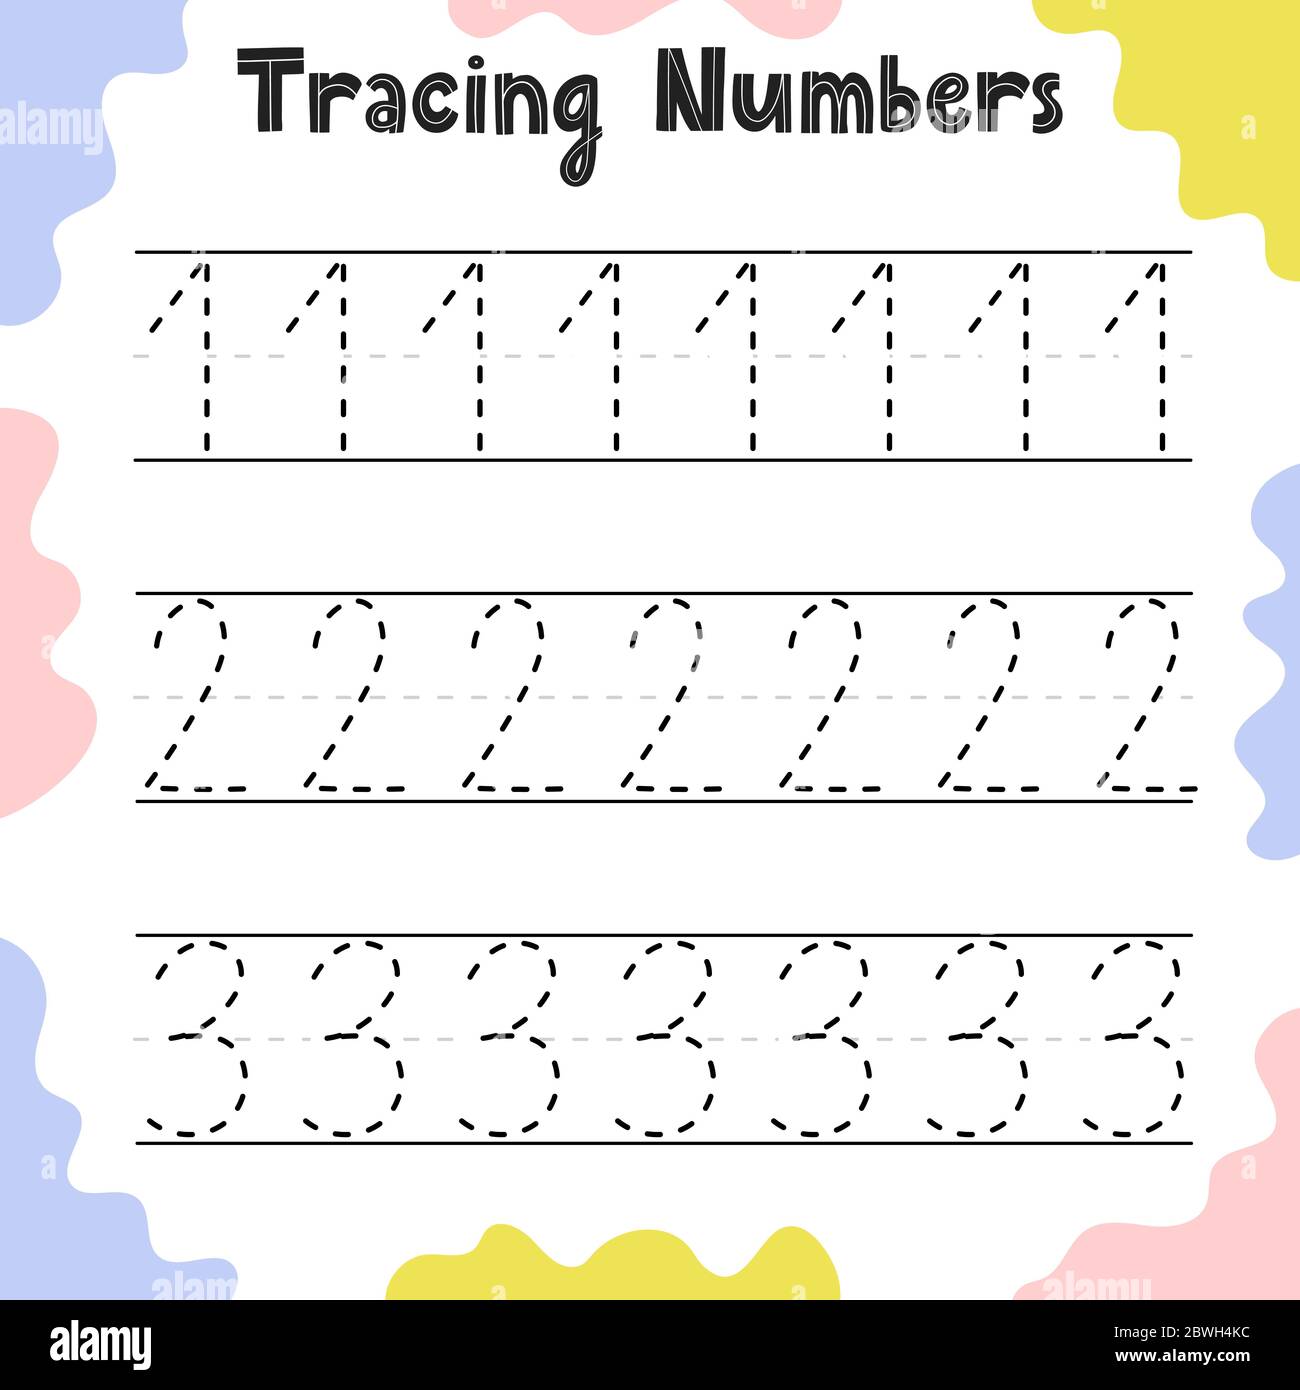 numbers 1 2 3 tracing practice worksheet for kids stock vector image